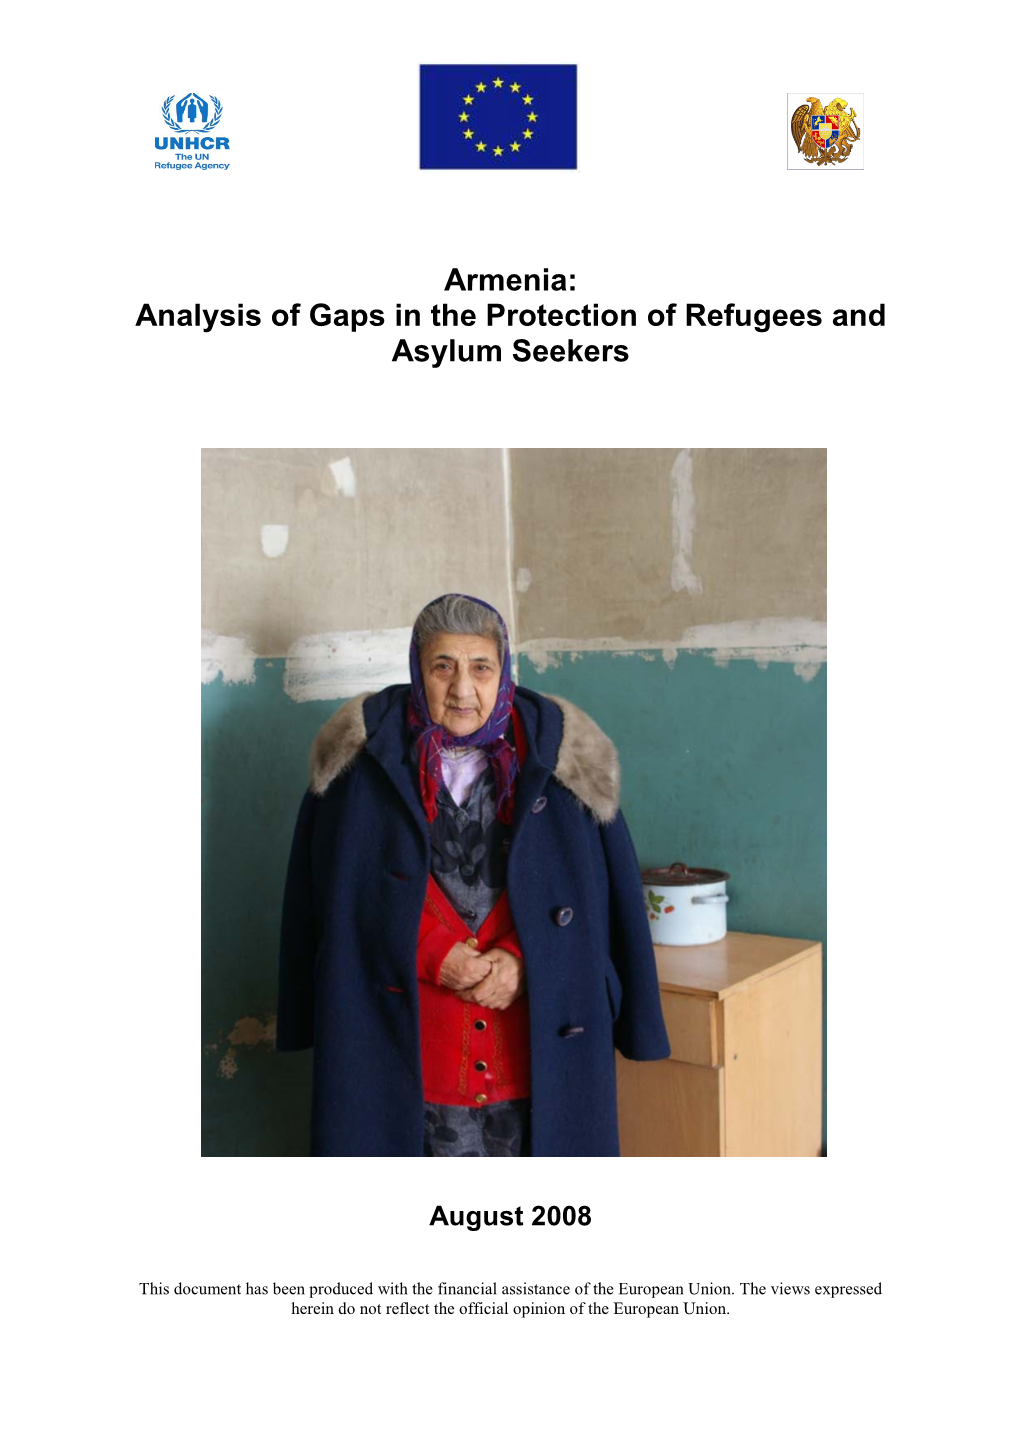 Analysis of Gaps in the Protection of Refugees and Asylum Seekers